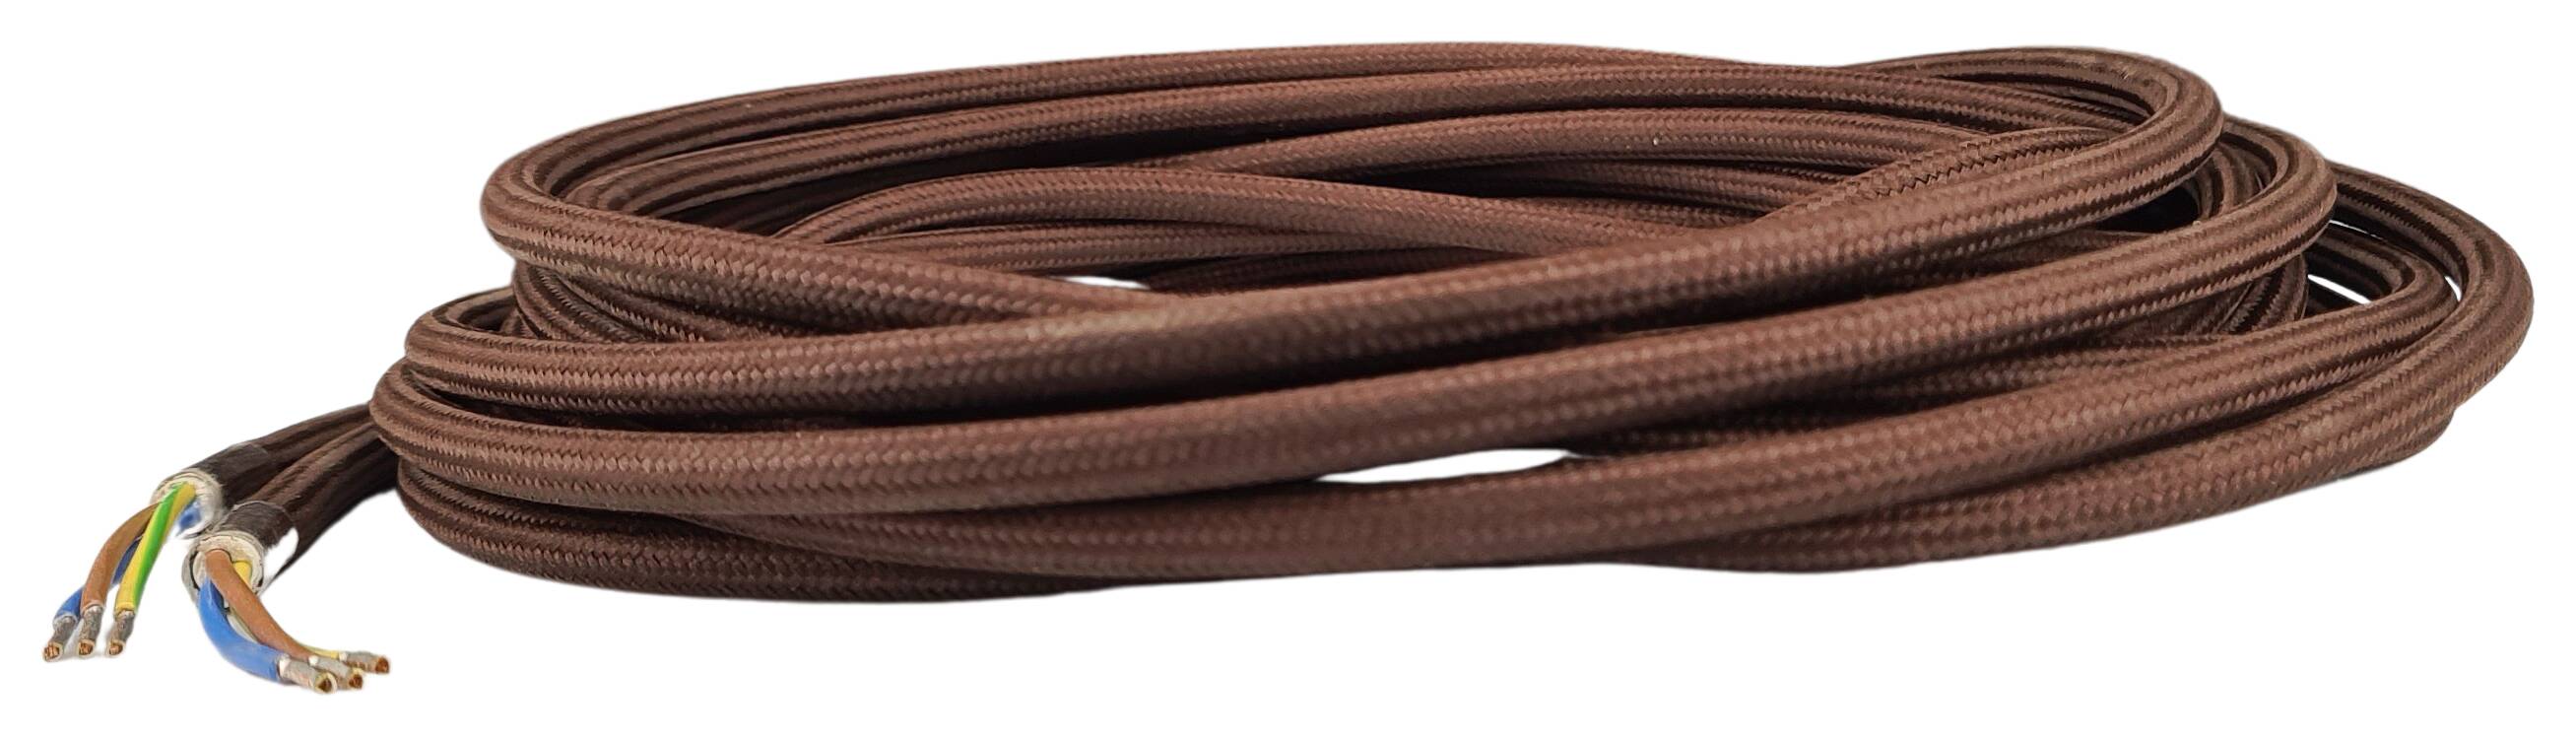 cable section 3G 0,75 H03VV-F textile braided 900 mm 60/ end sleeve 30/ stripped color 285 brown